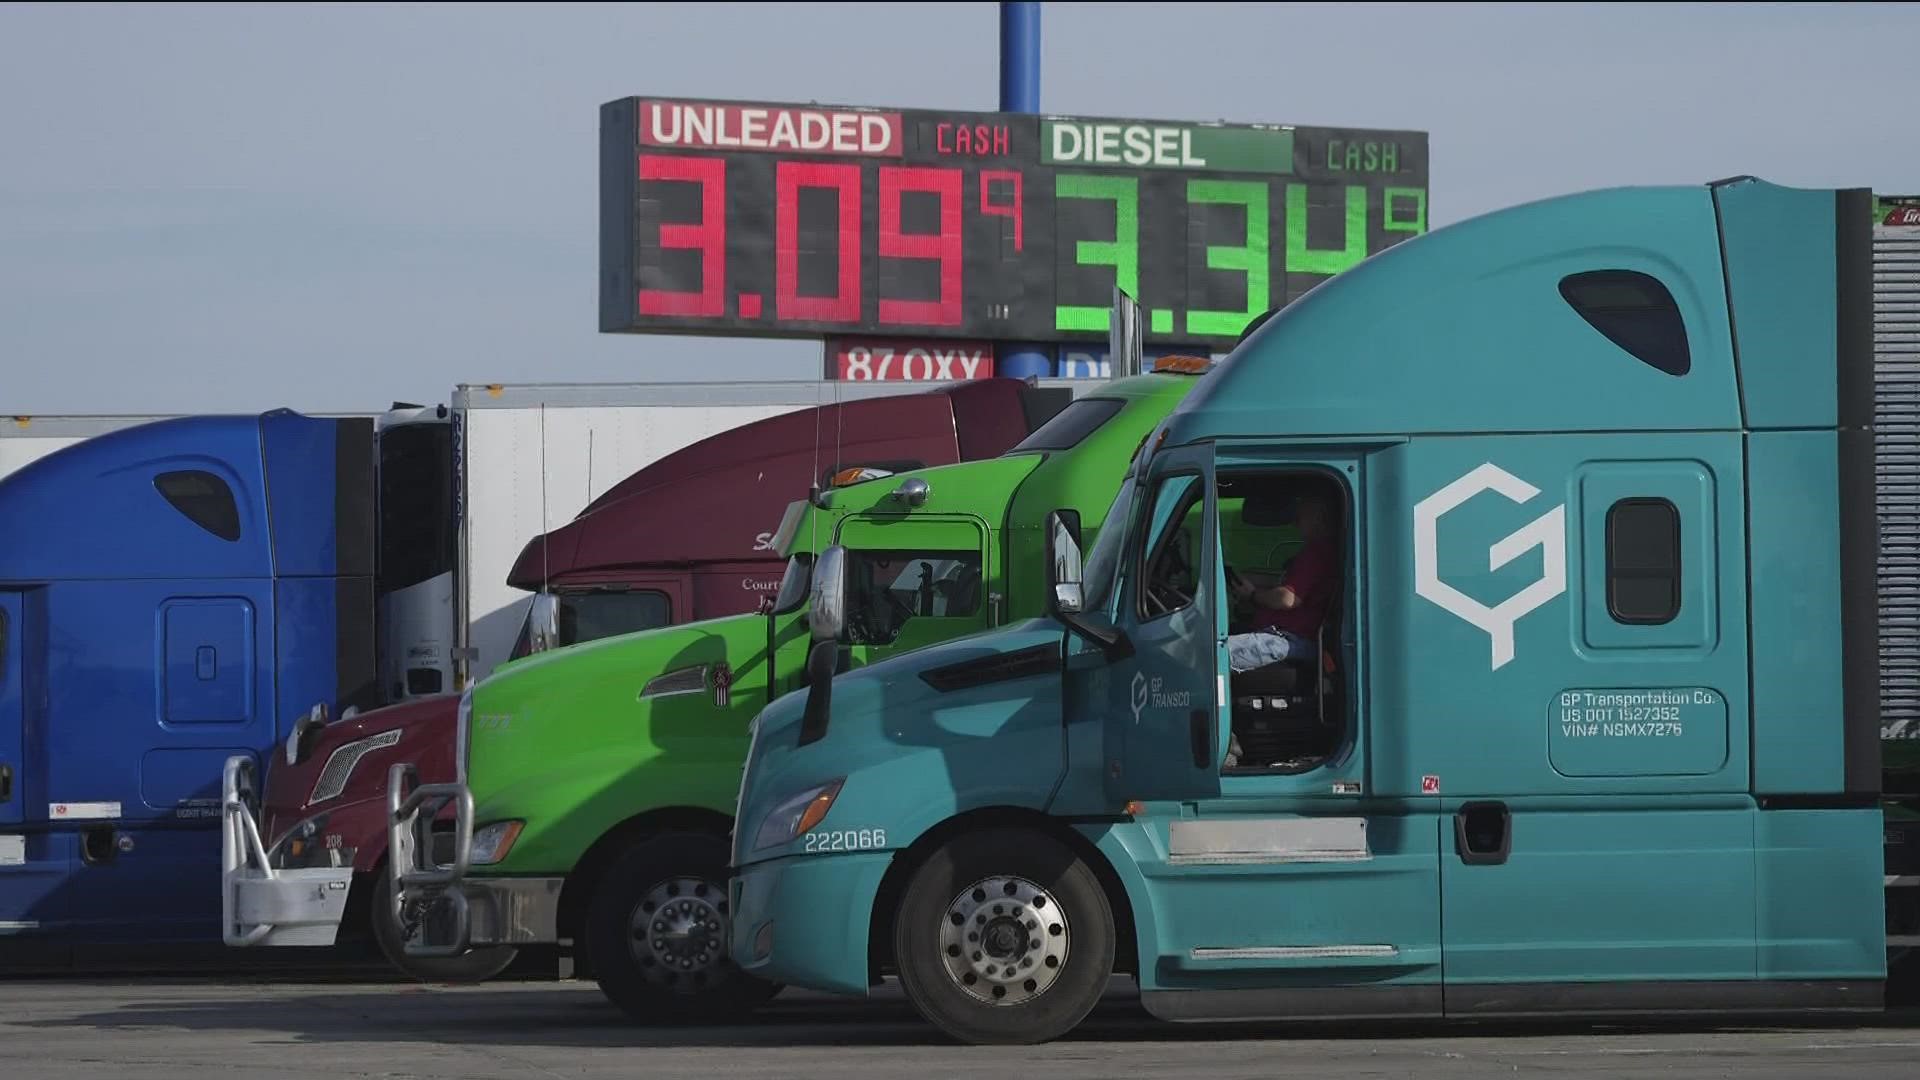 The supply of diesel fuel is a major concern amid talk that the U.S. is close to running out.